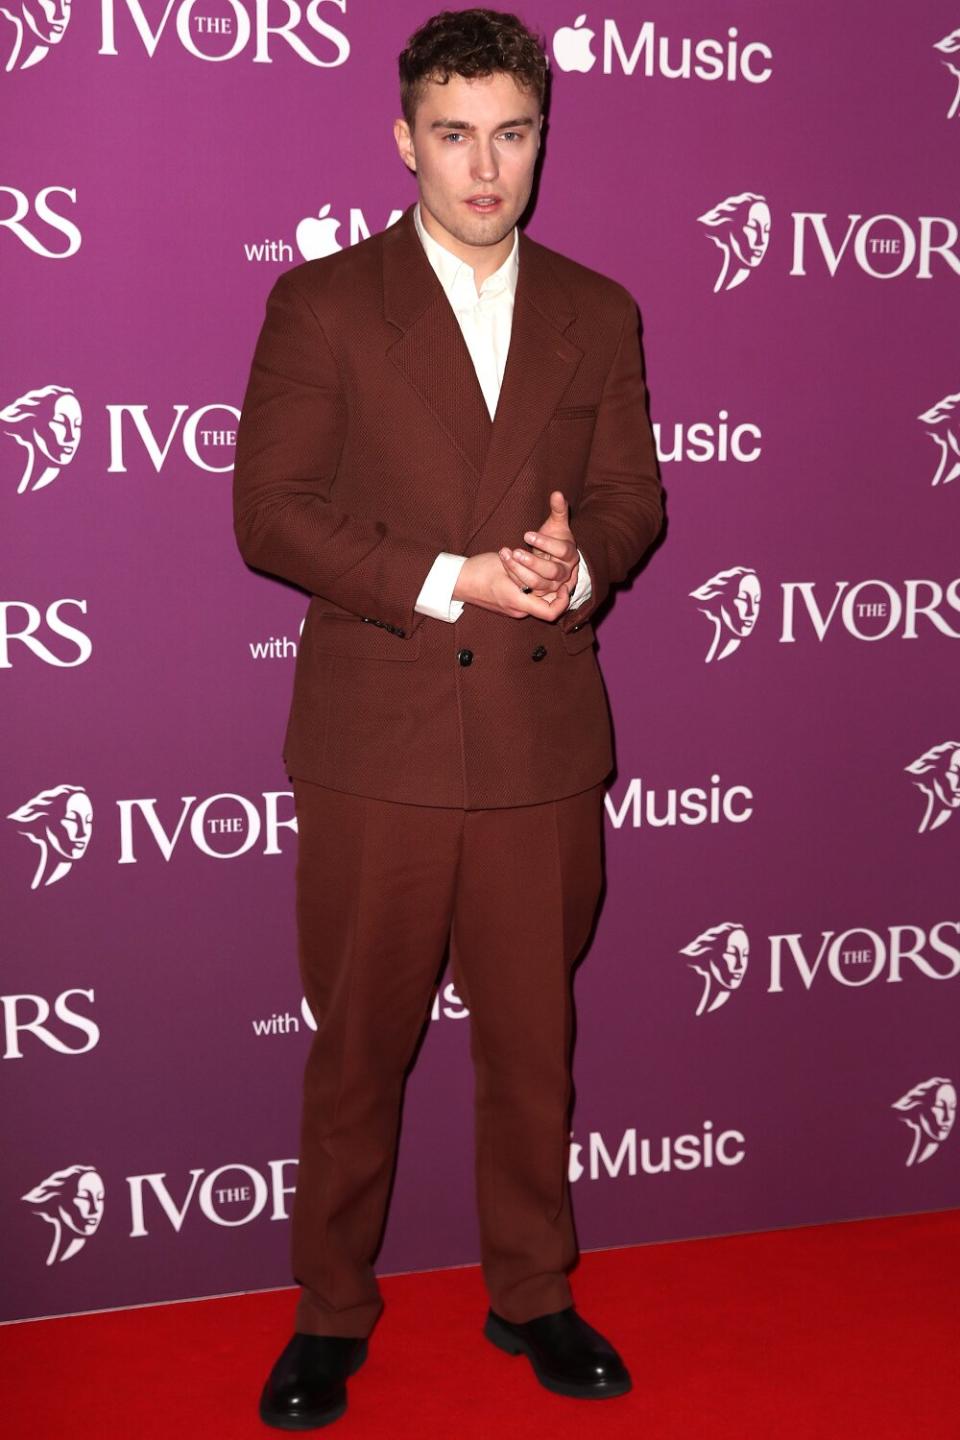 Sam Fender attends The Ivor Novello Awards 2022 at The Grosvenor House Hotel on May 19, 2022 in London, England.